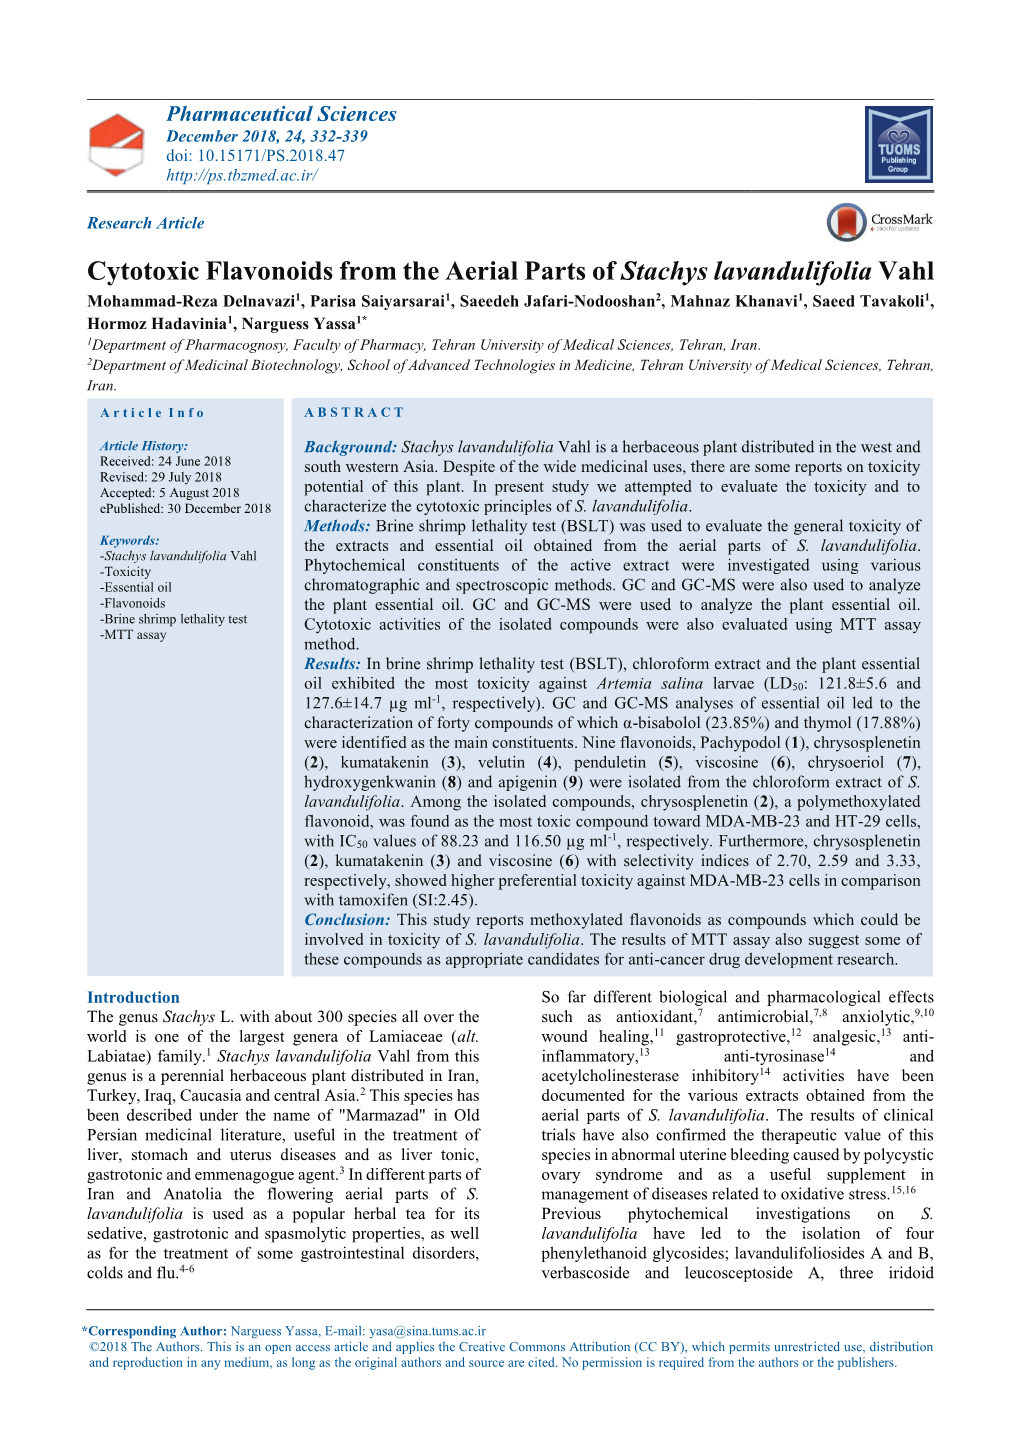 Cytotoxic Flavonoids from the Aerial Parts of Stachys Lavandulifolia Vahl